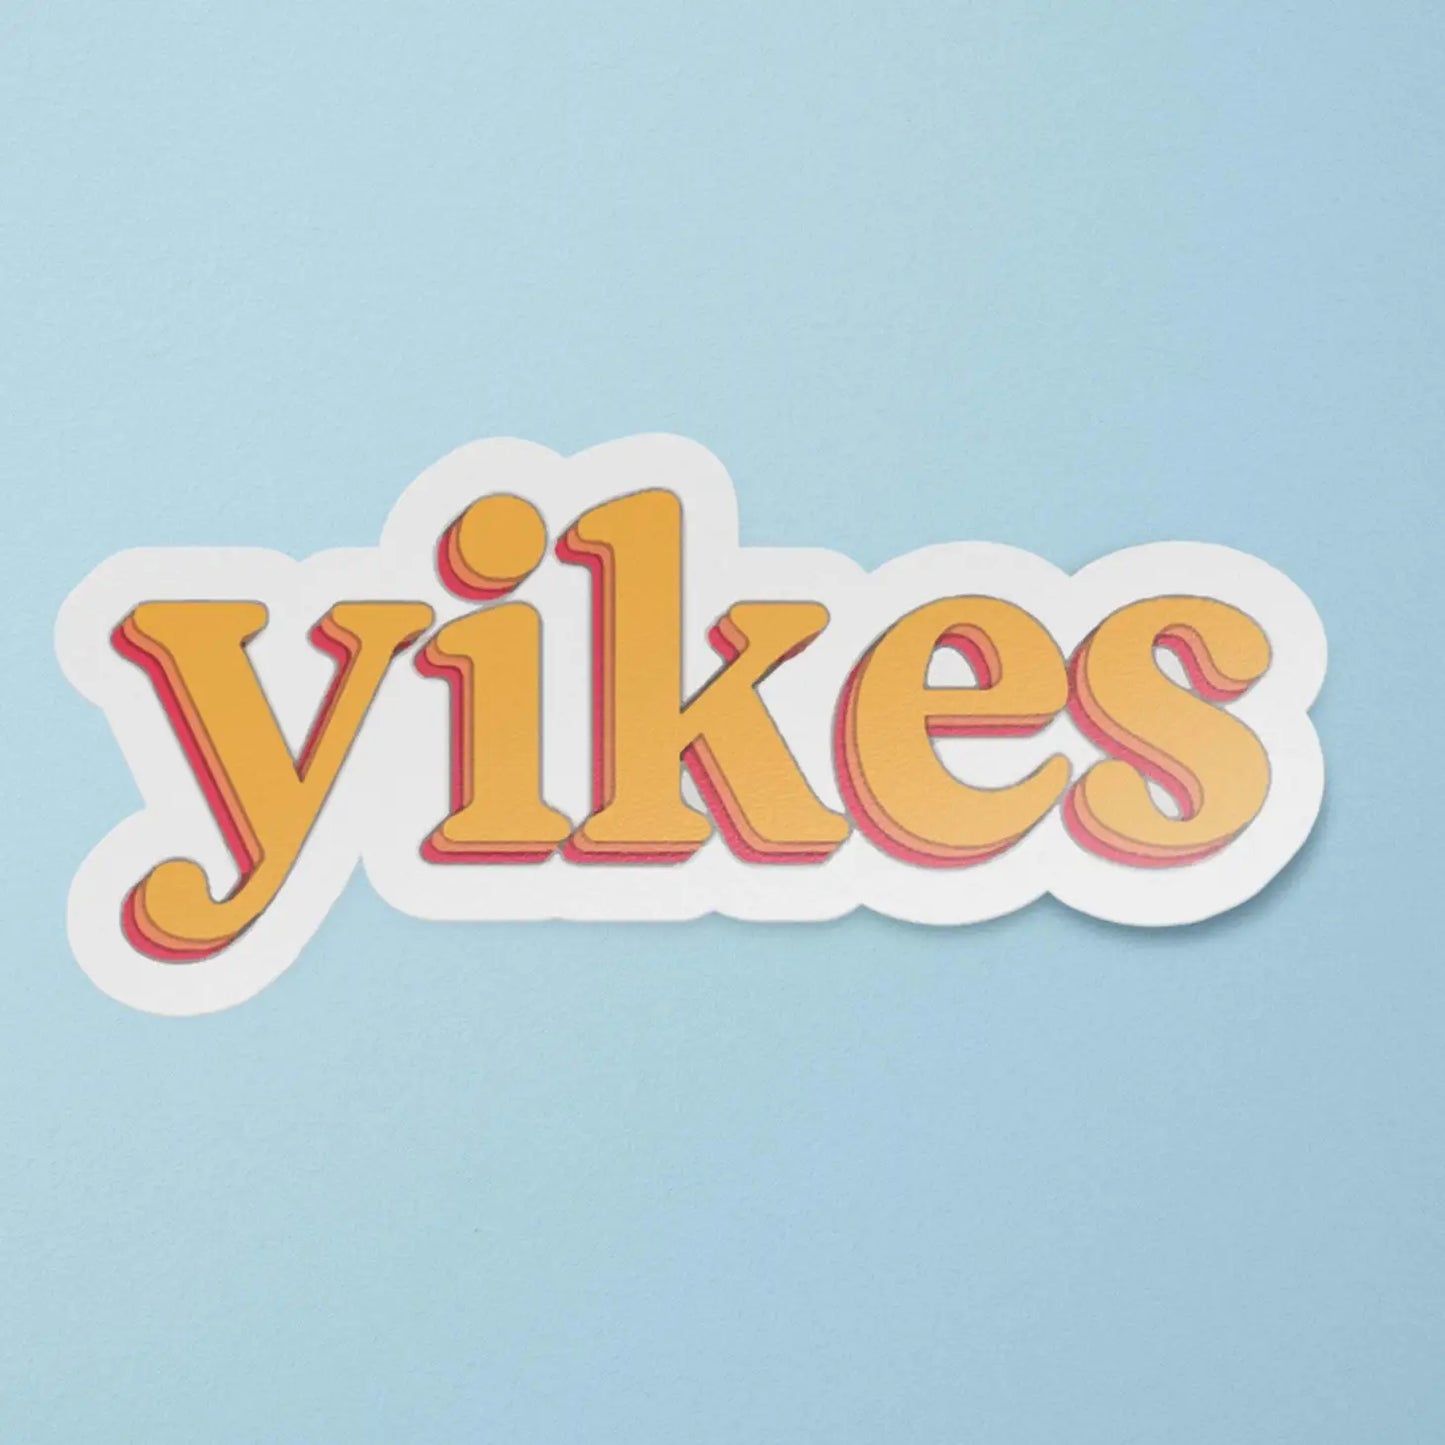 Yikes Stickers